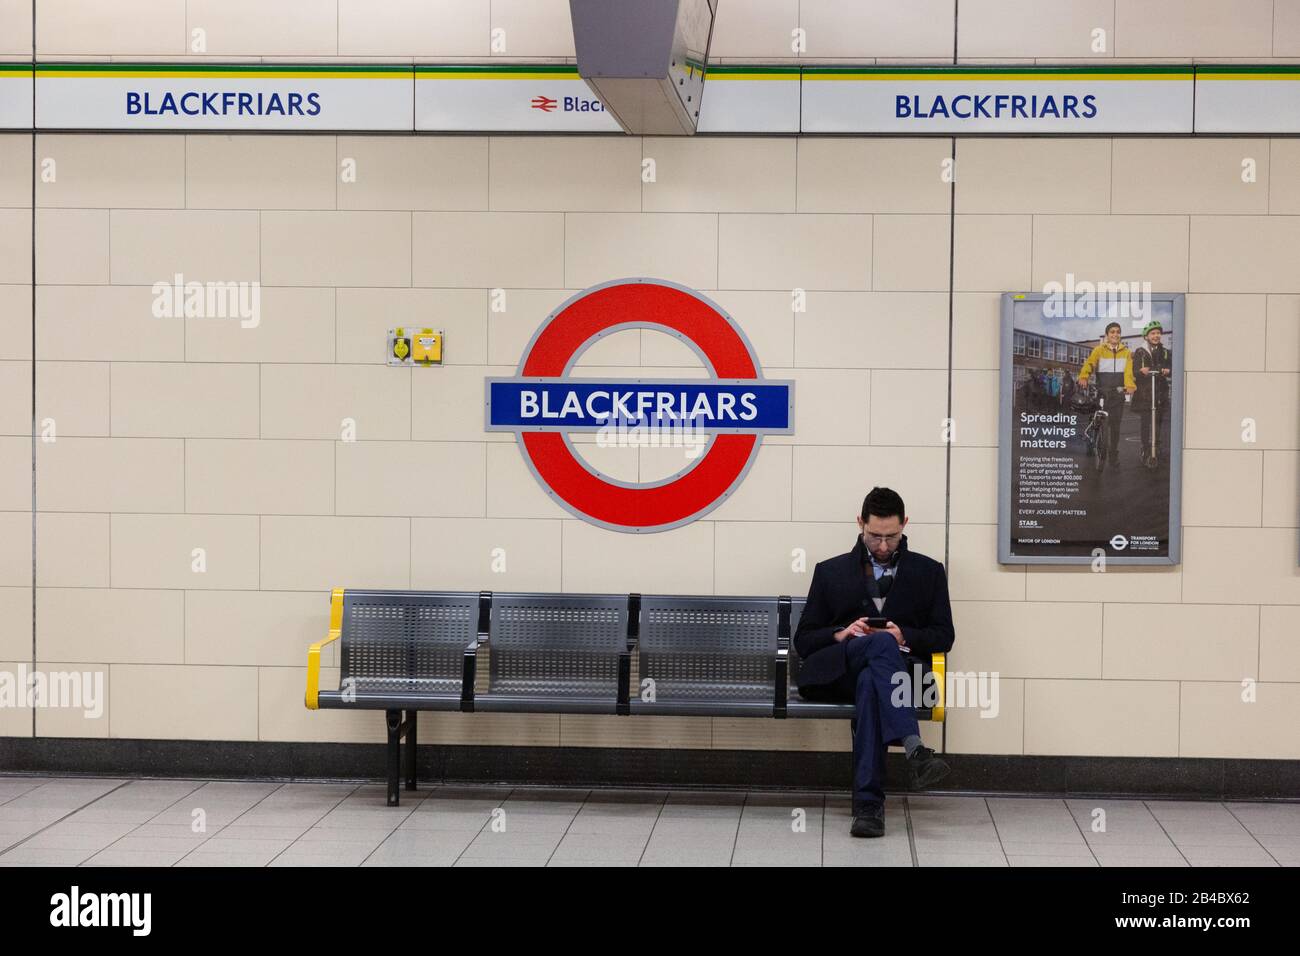 A man sitting on a bench on the platform of Blackfriars Tube station, or Blackfriars London Underground station, Blackfriars London UK Stock Photo